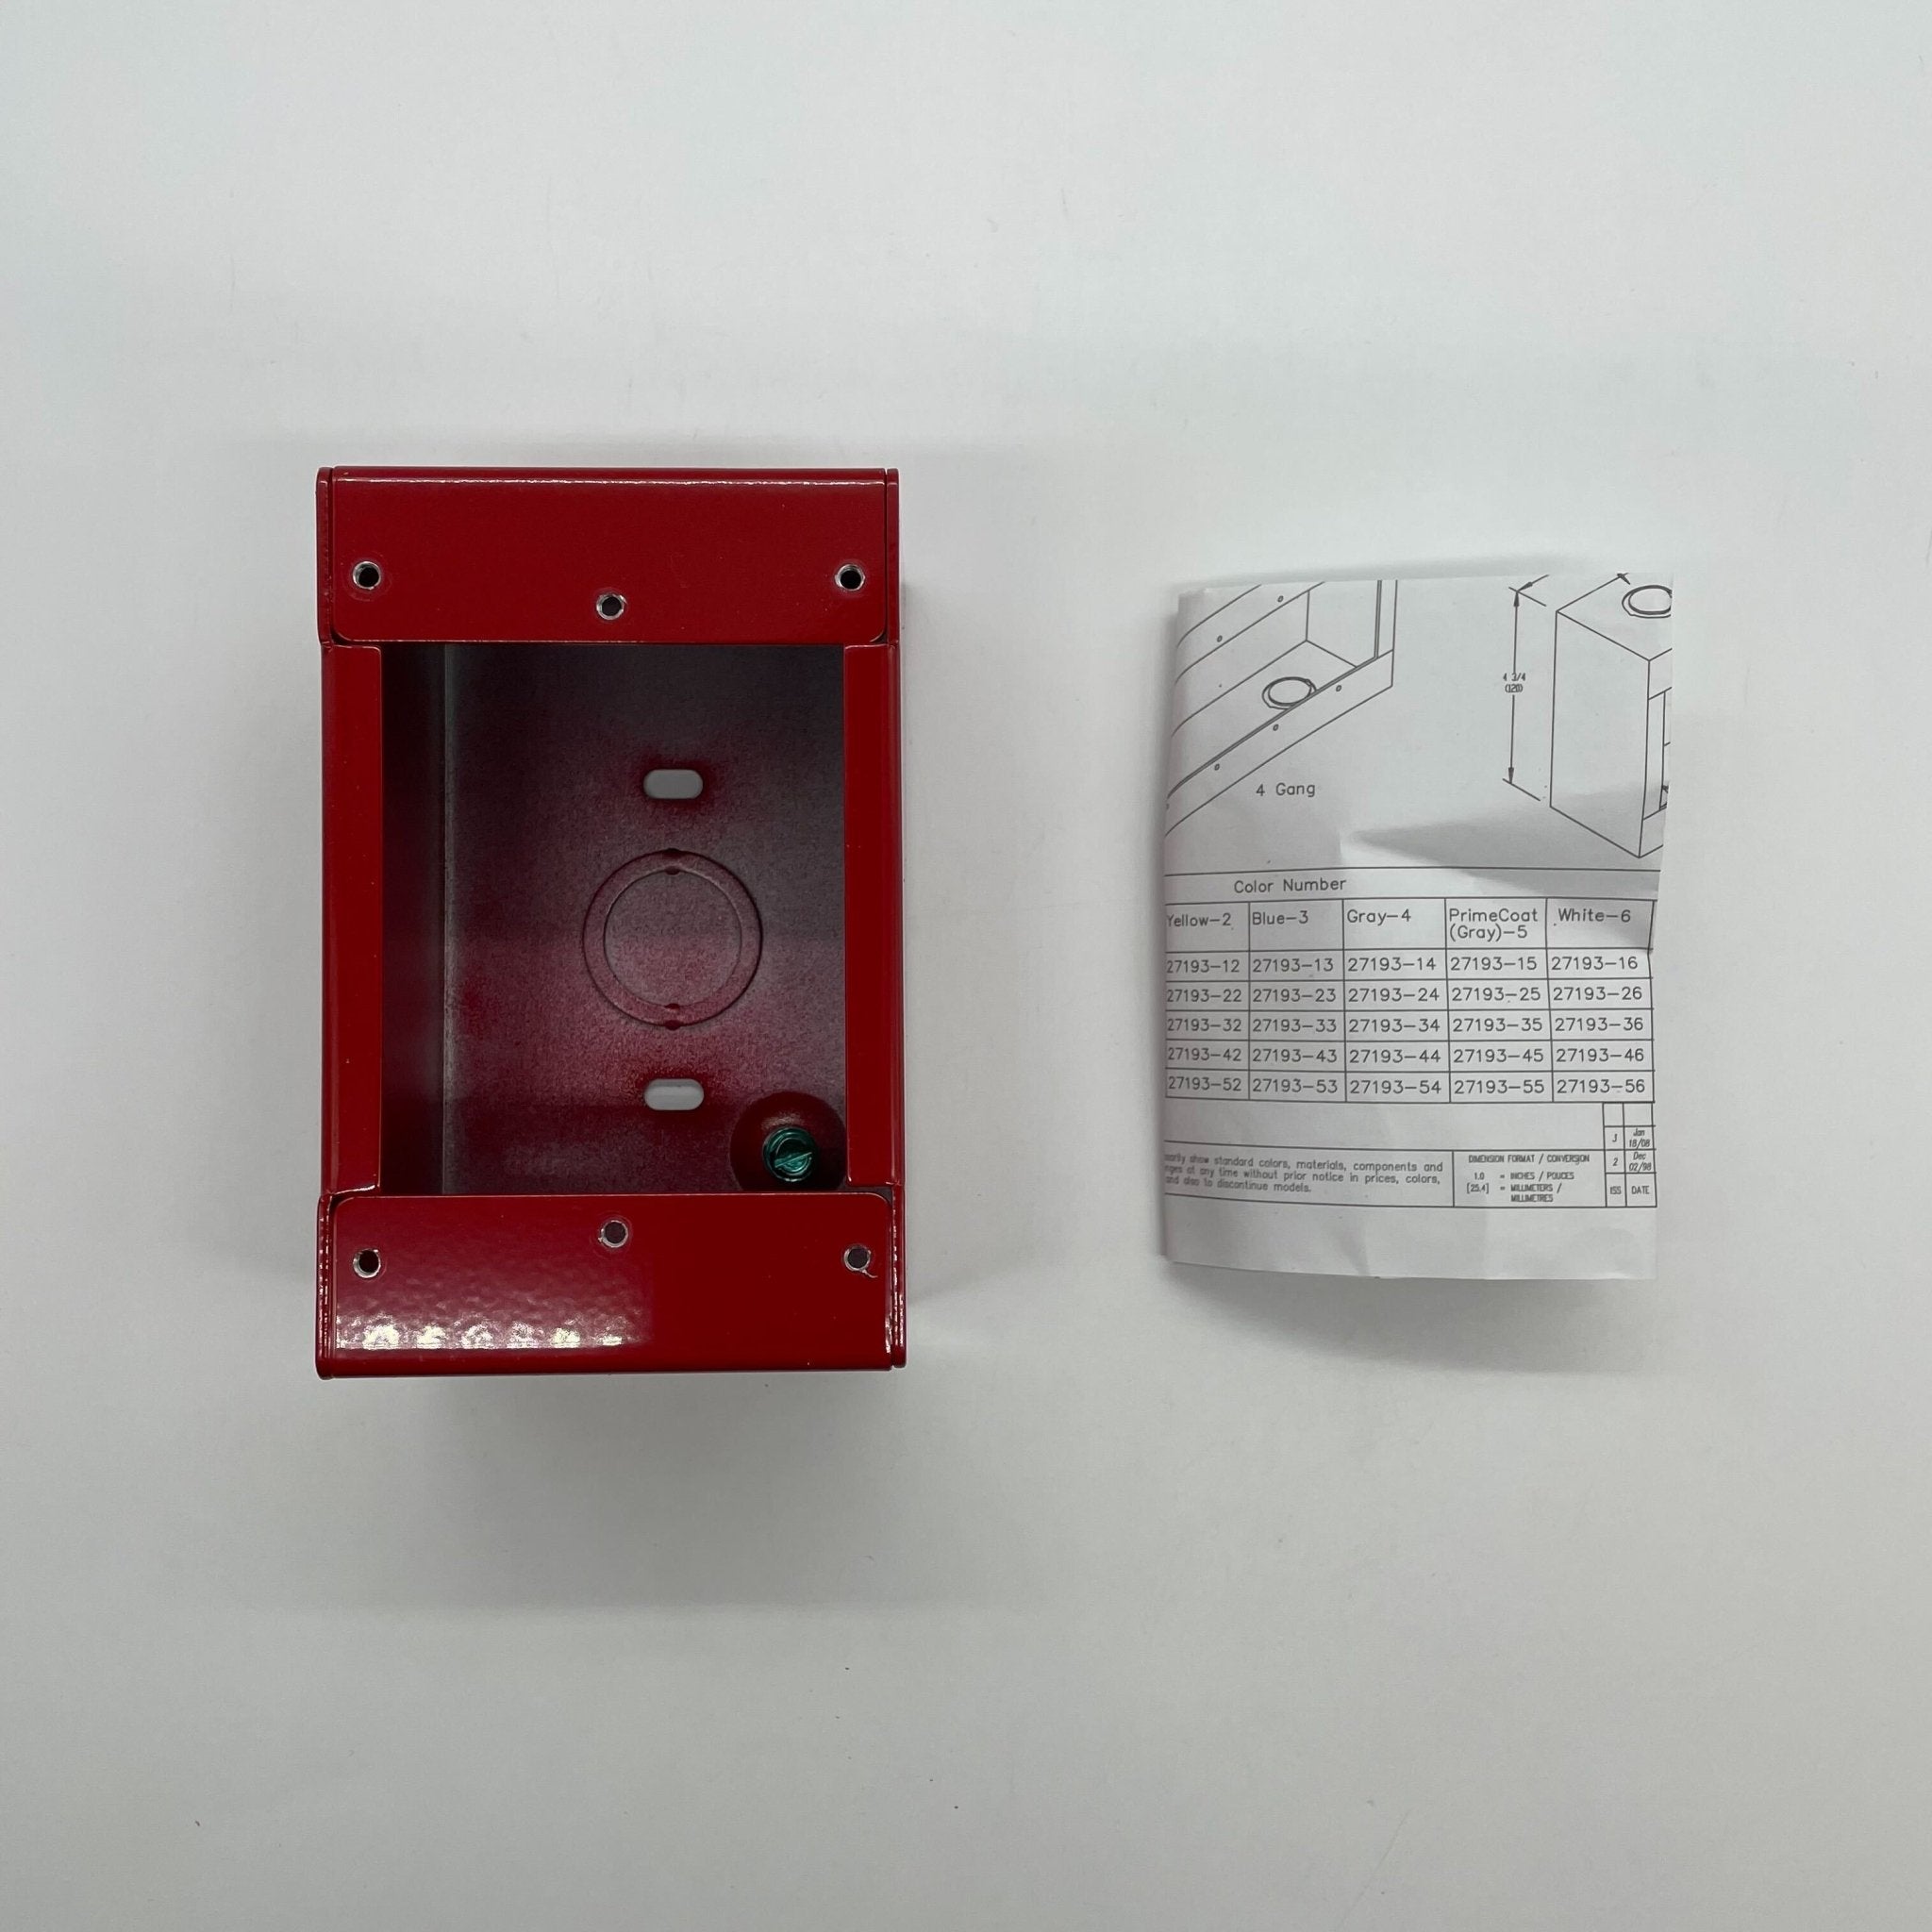 Edwards 27193-11 - The Fire Alarm Supplier